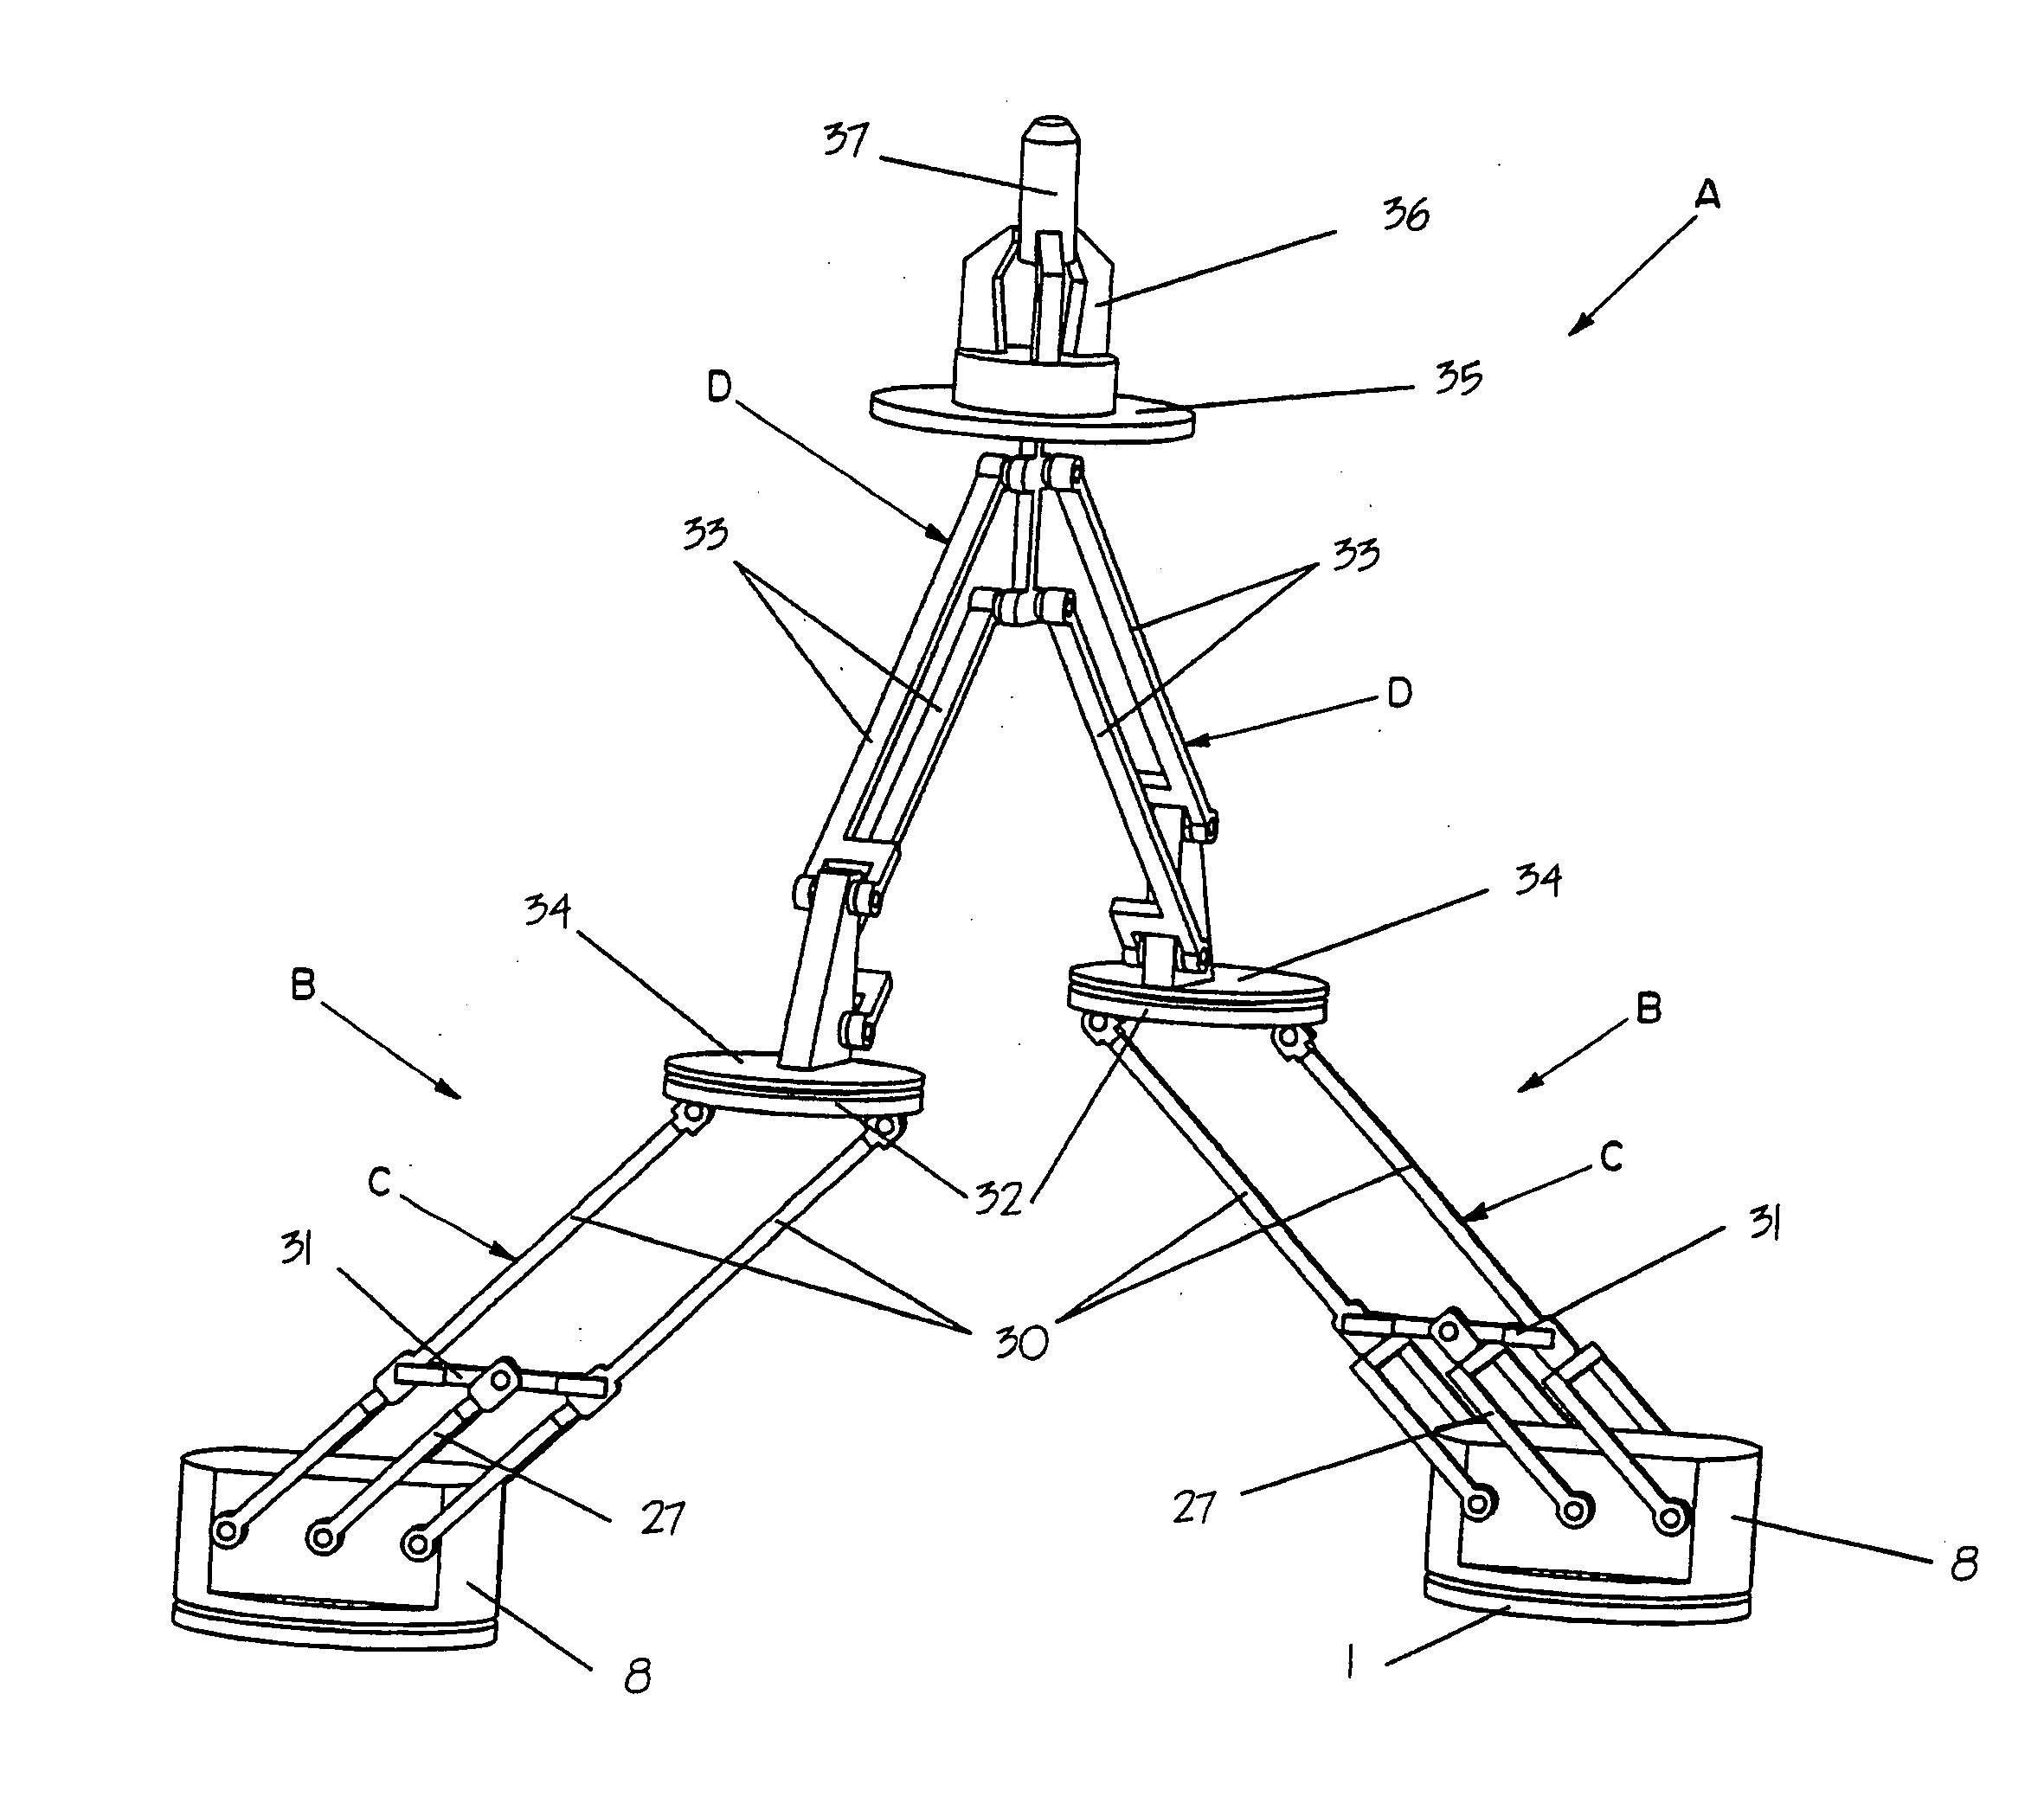 Four-degree-of-freedom parallel manipulator for producing schonflies motions